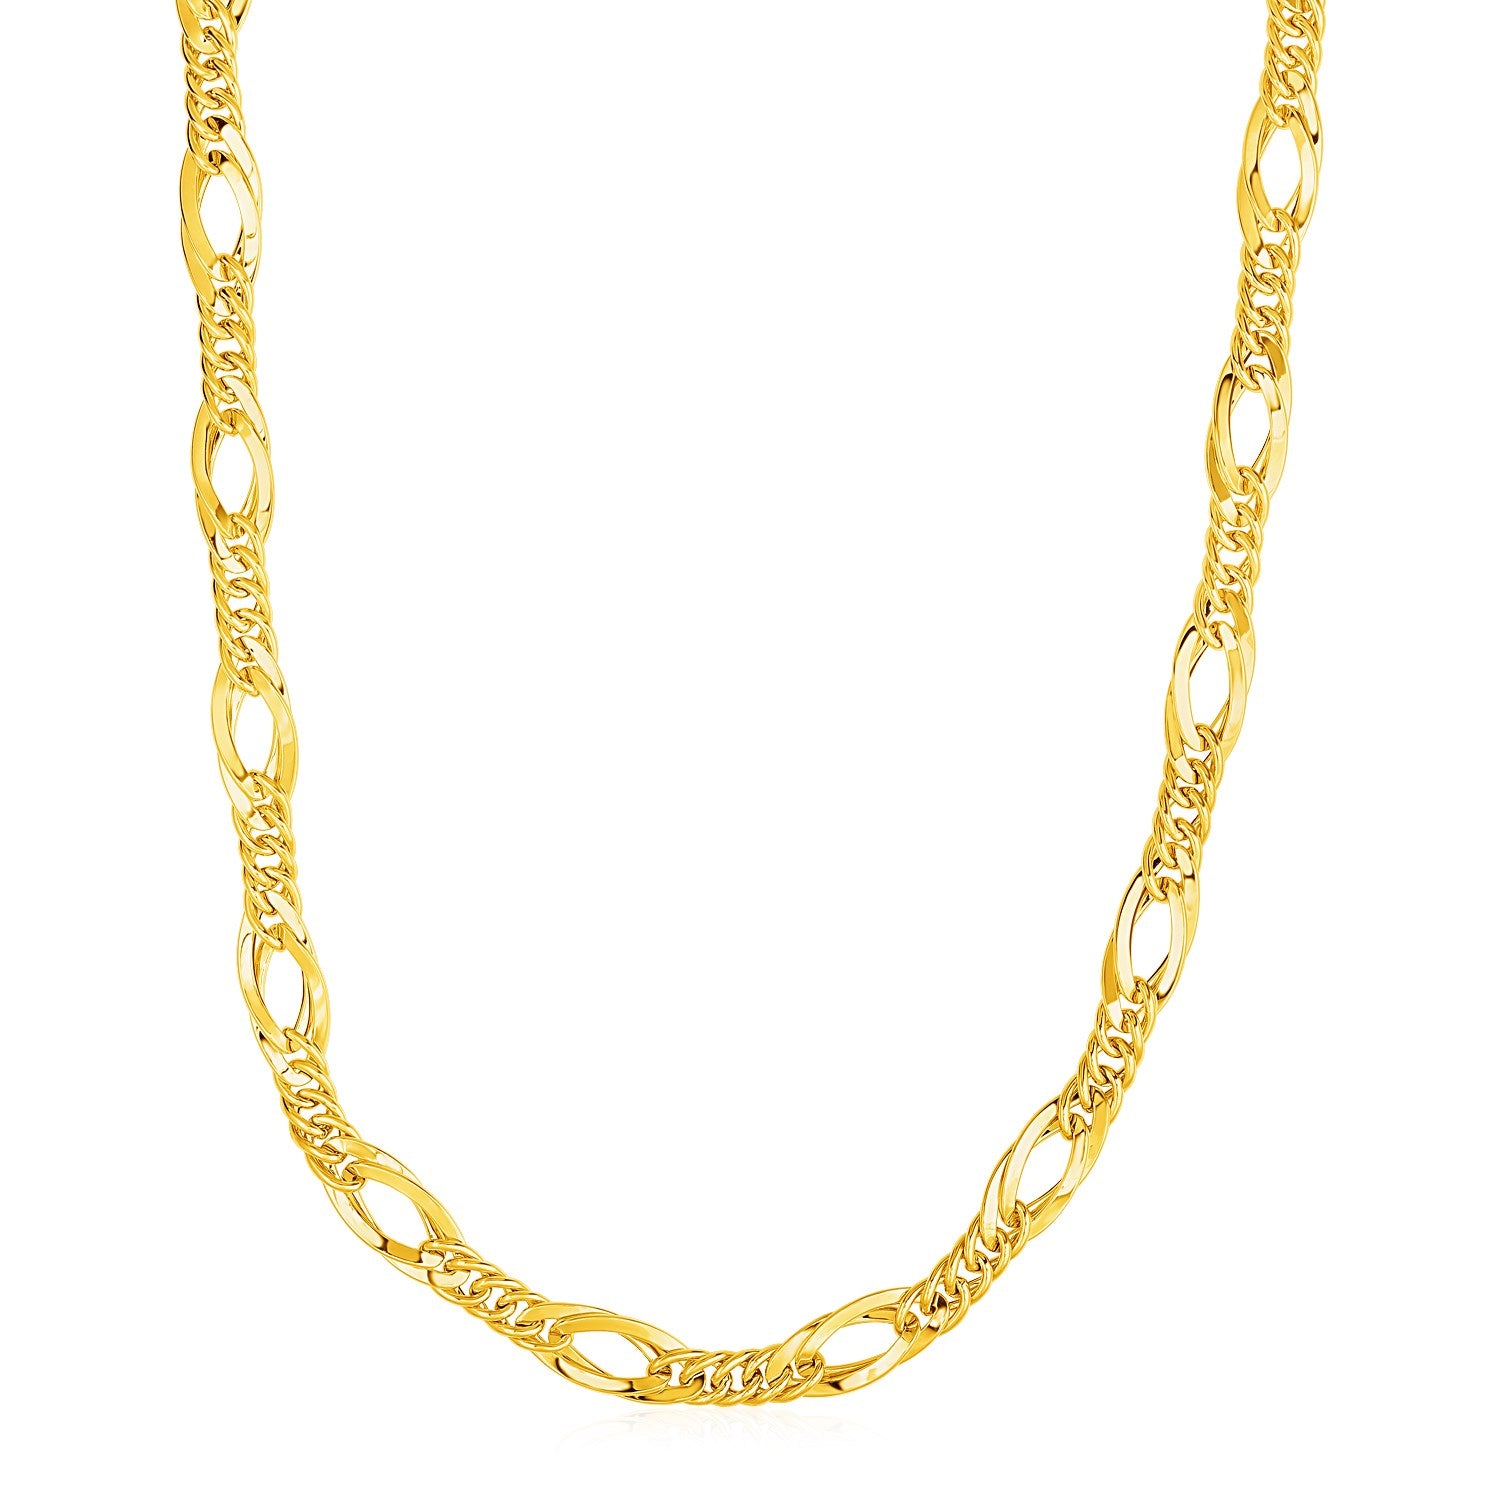 Twisted Oval Chain Necklace in 14k Yellow Gold